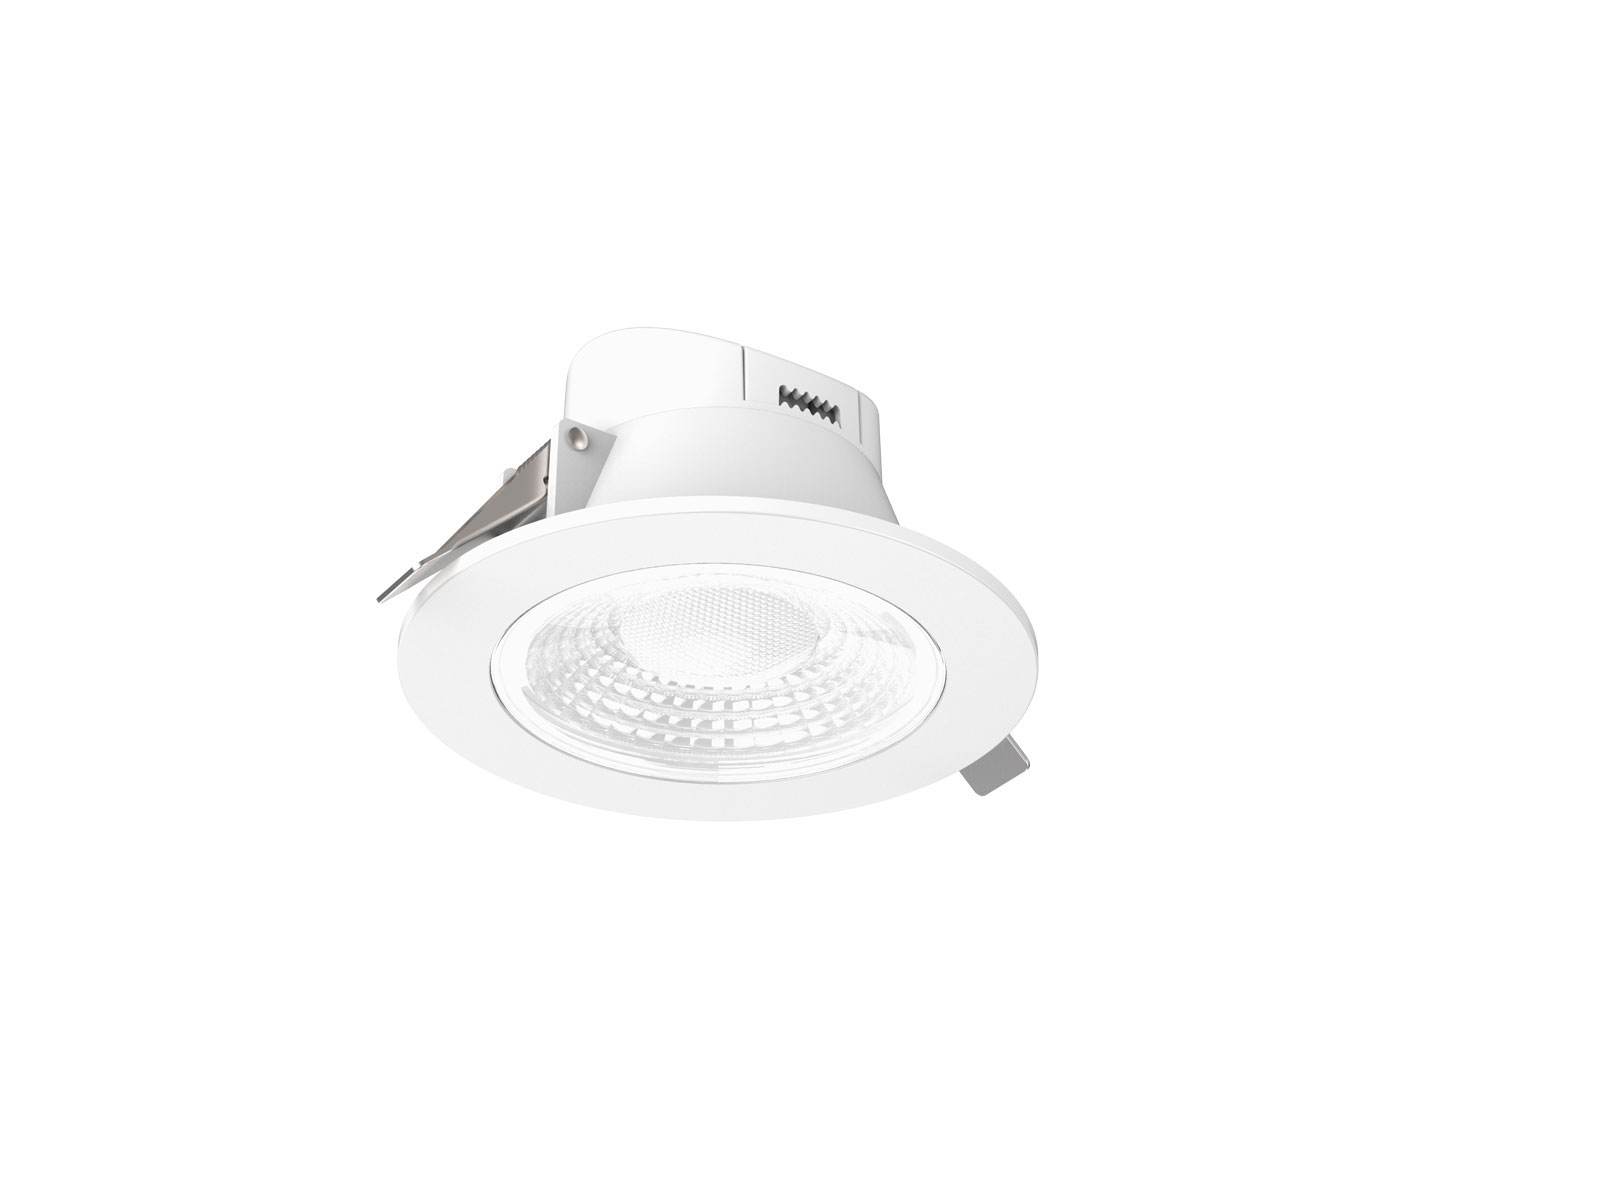 DL41D 3 3 CCT Dimmable Recessed Downlights